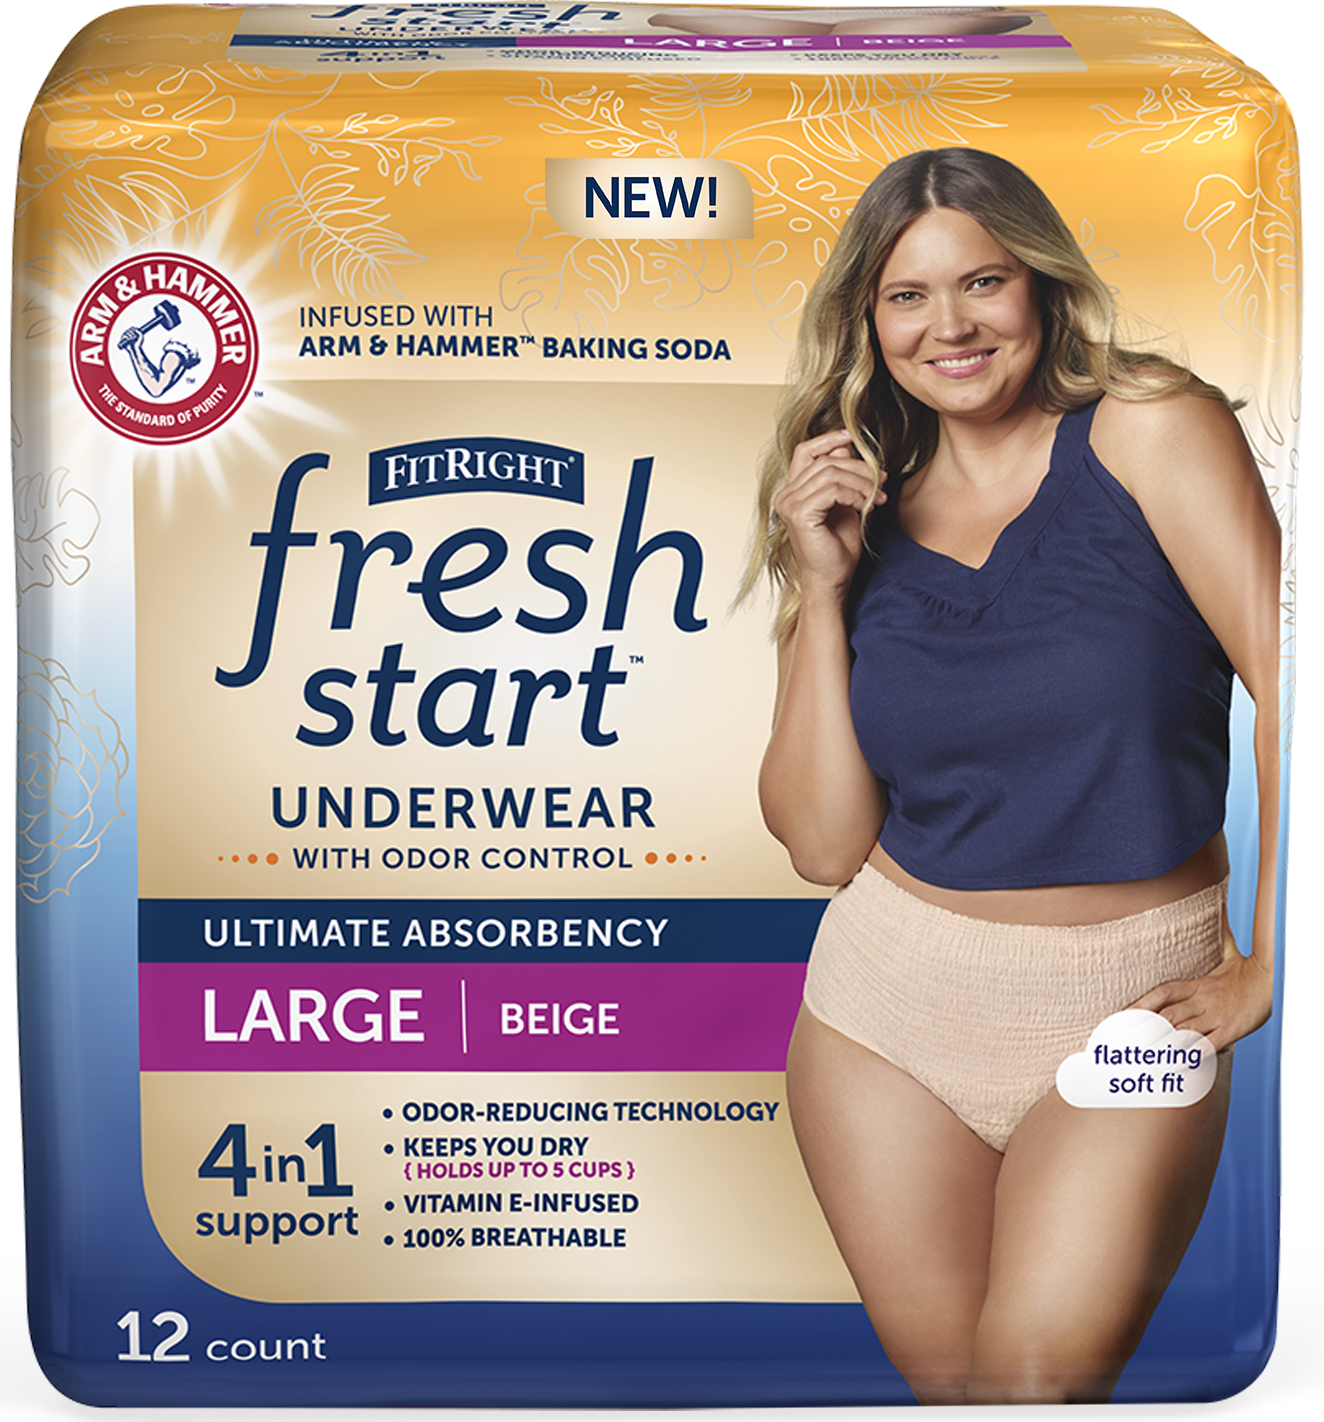 Packaging for large beige underwear. Features a model in the underwear and information about the product and its features.